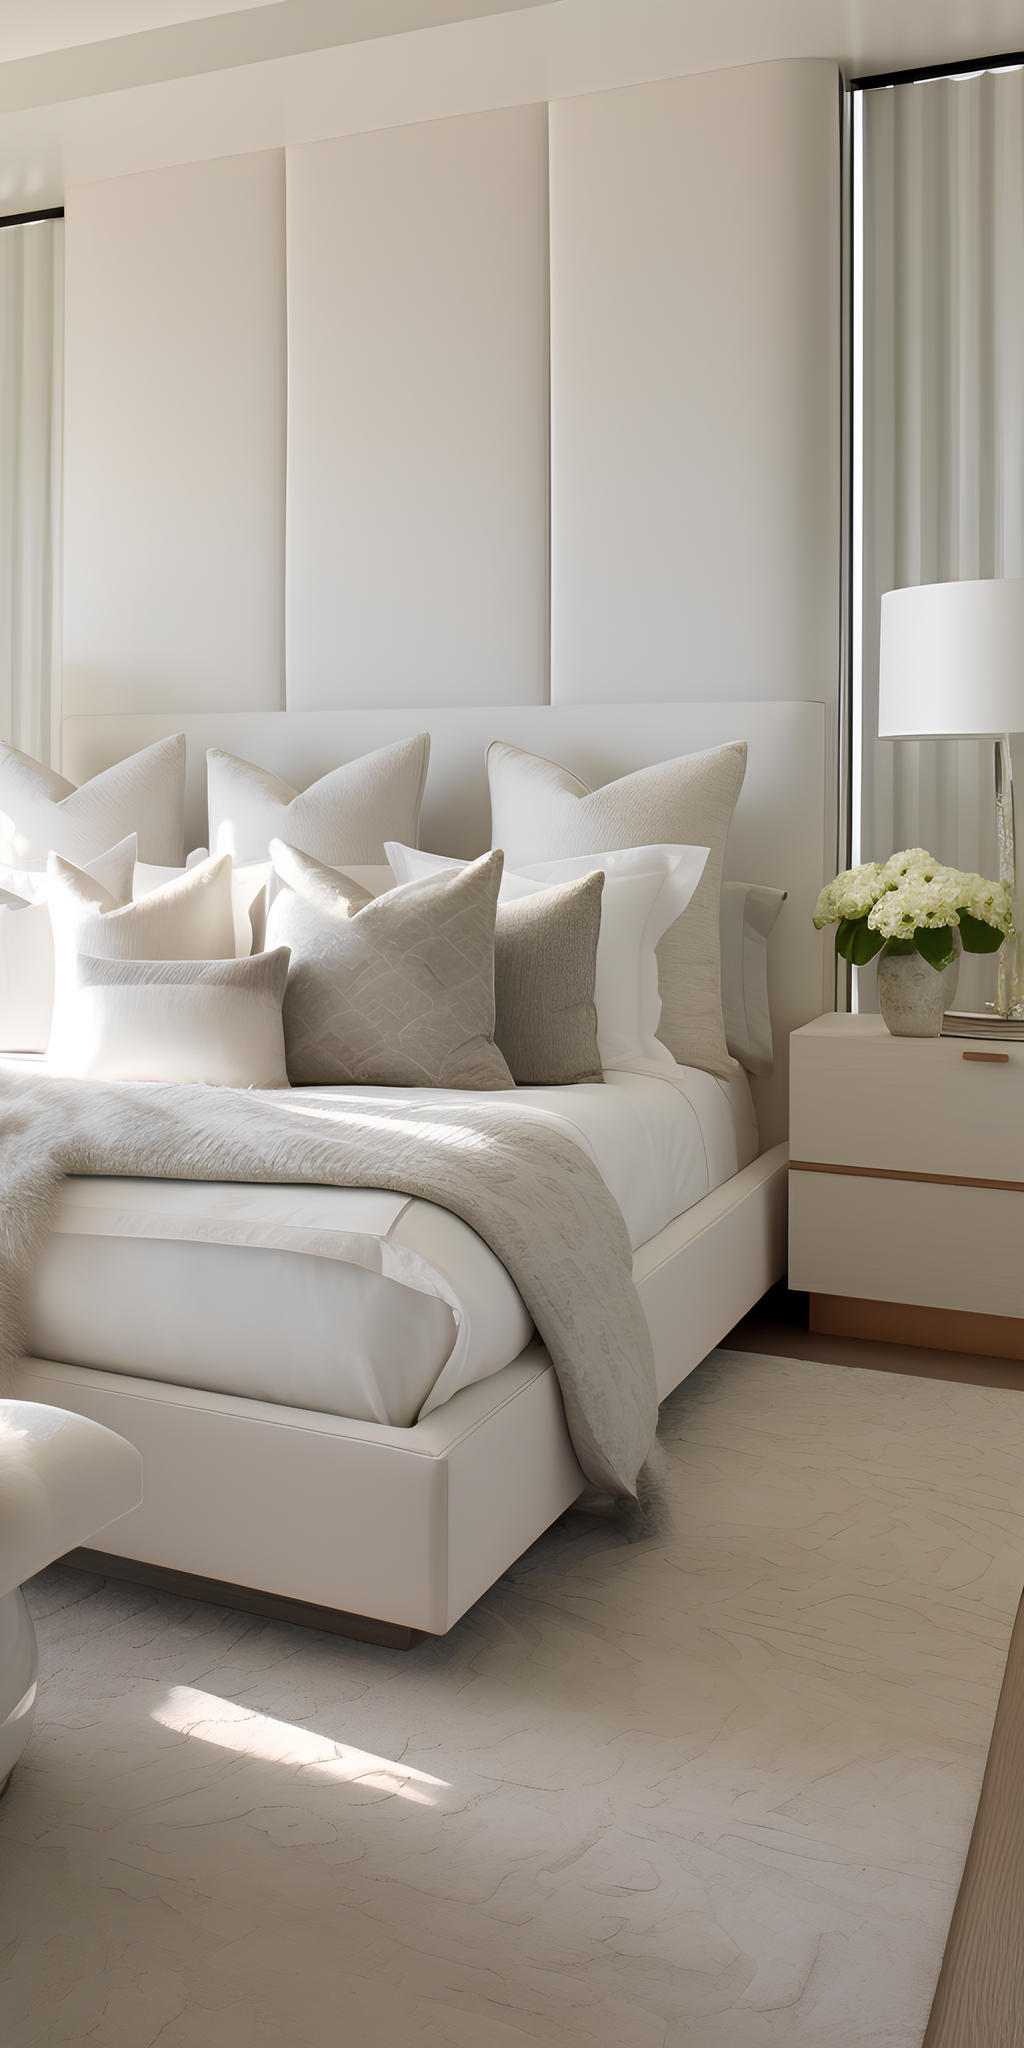 Luxury Bed Designs: Sleep in Style and Comfort with Luxurious Bed Designs